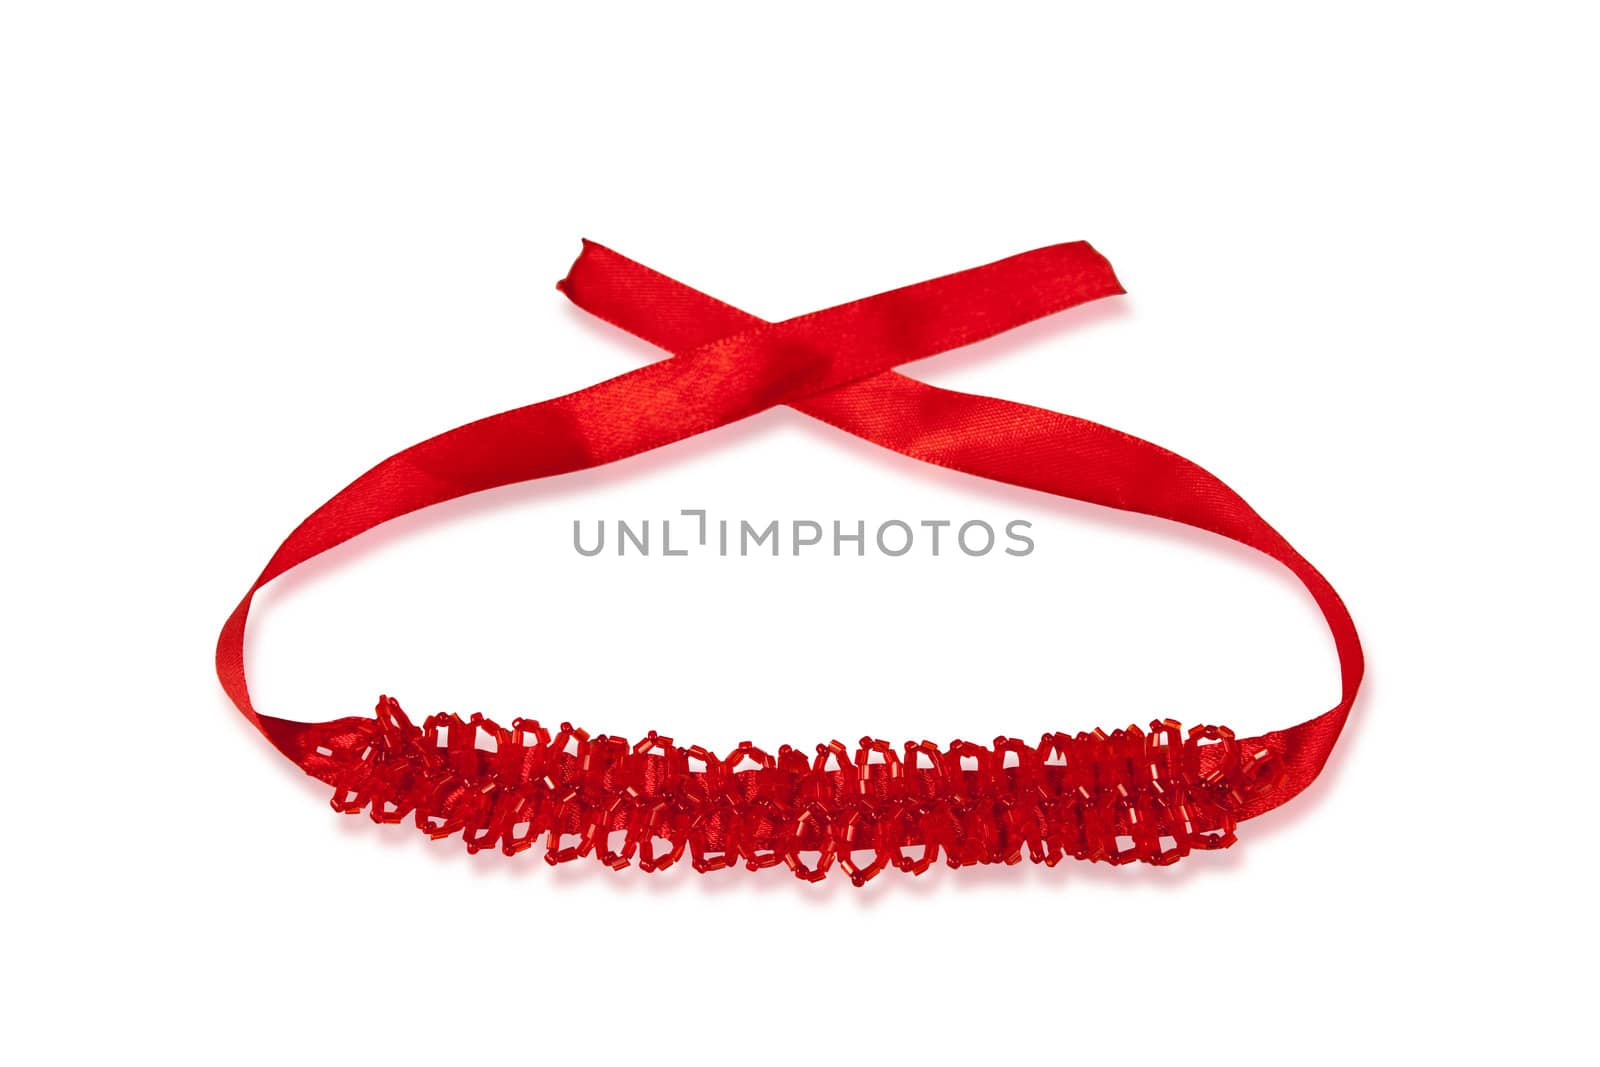 Red beaded necklace isolated on white with clipping path